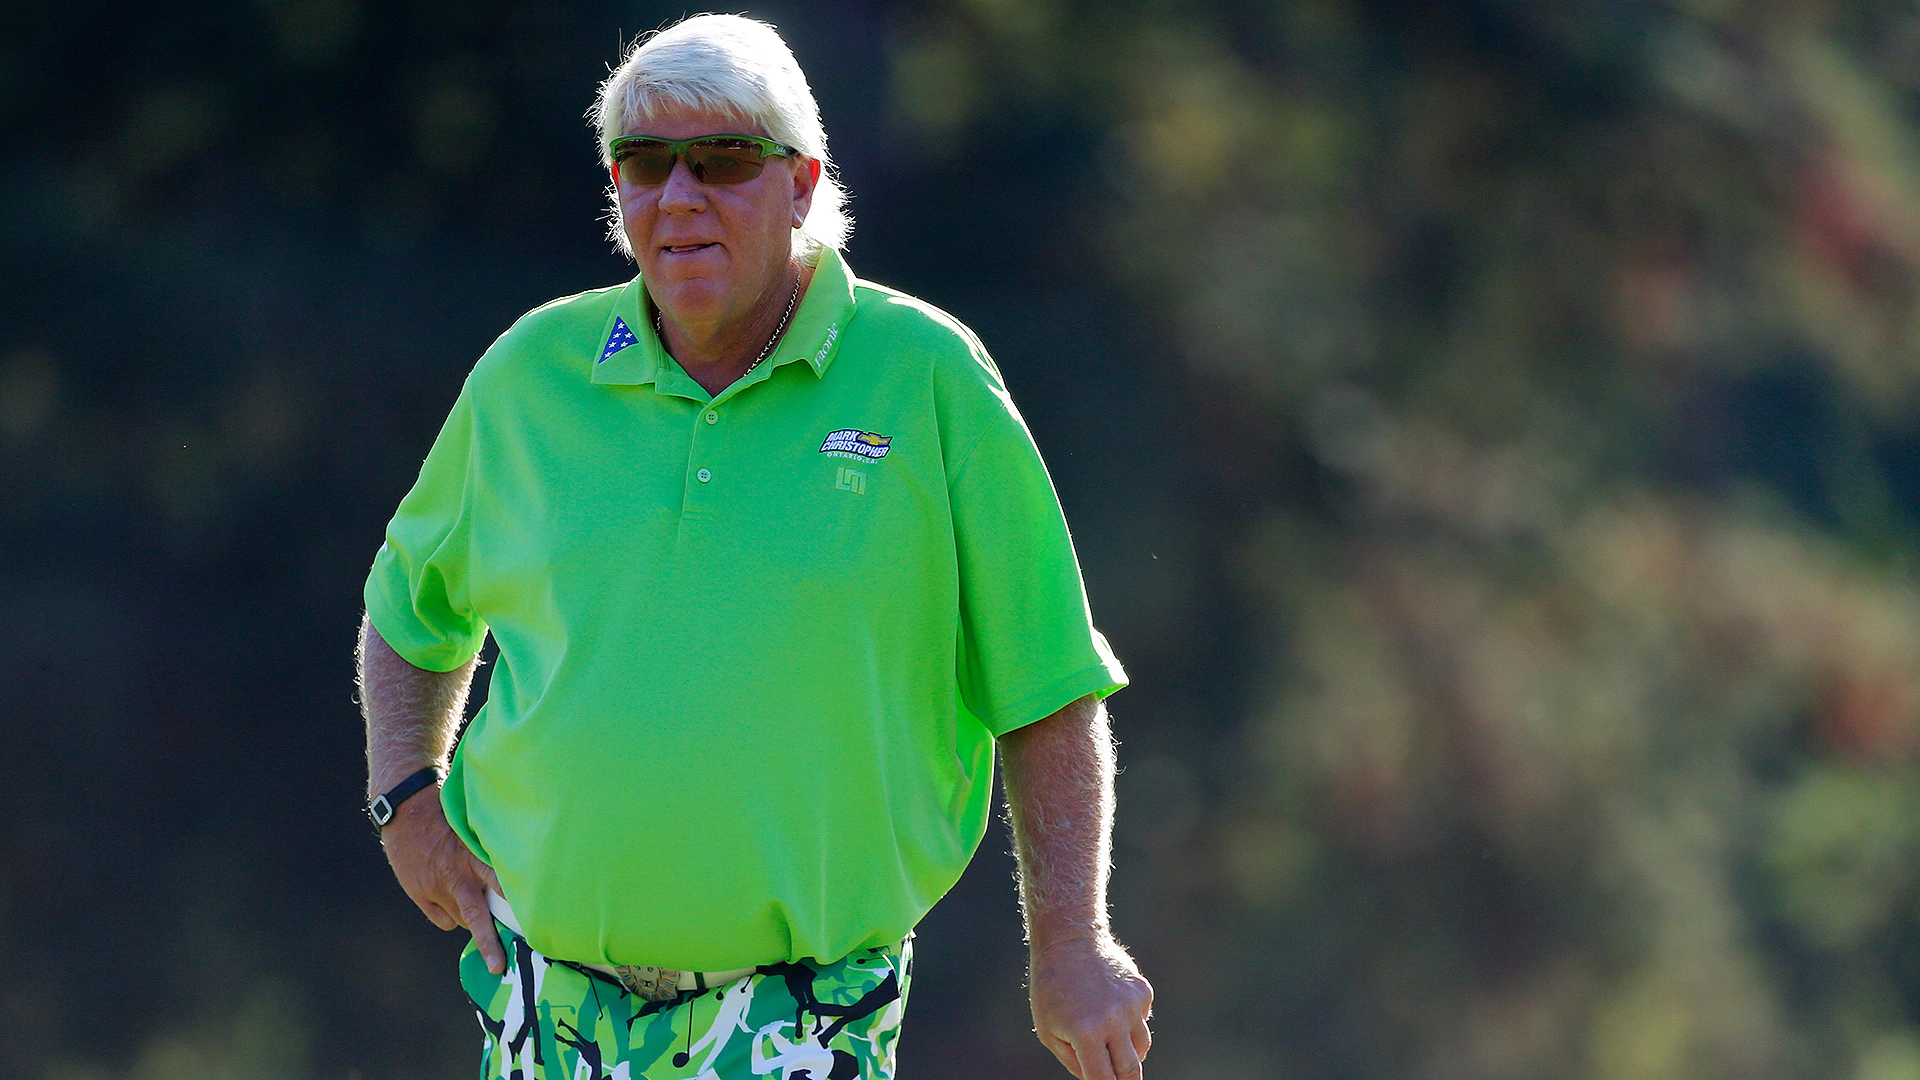 John Daly cites COVID-19, joins growing list of PGA Championship withdrawals